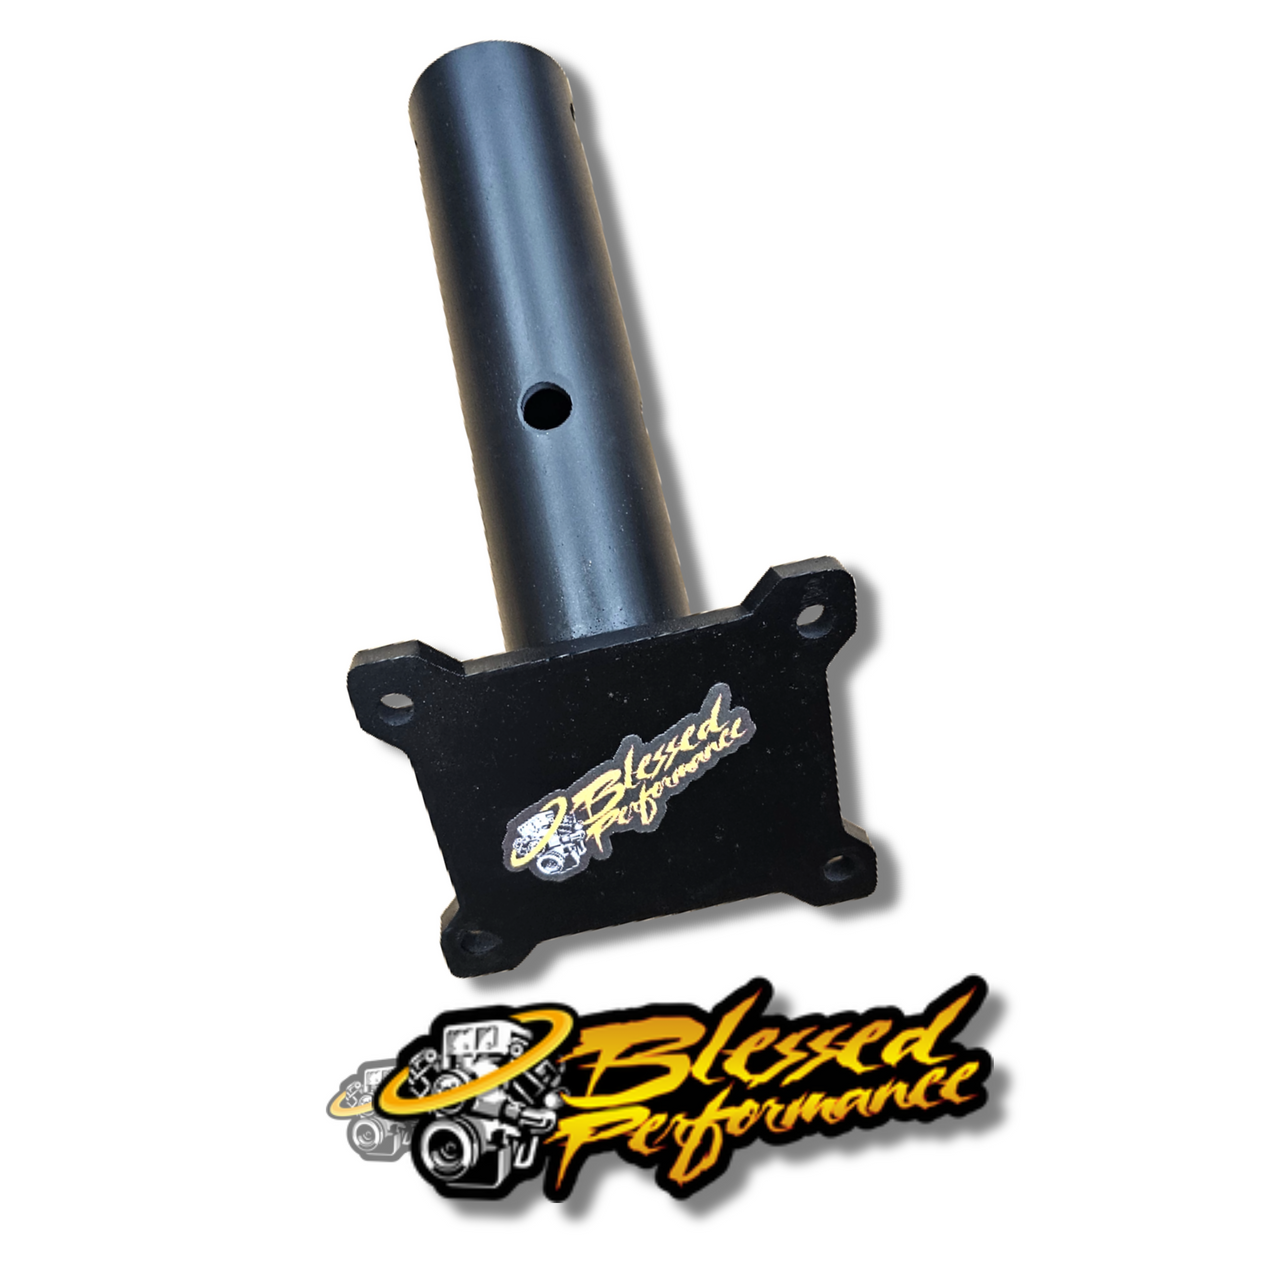 Blessed Performance Engine Mount for 2003 to 2010 Ford 6.0L And 6.4L Powerstroke (BPEM6064) Full 2 View